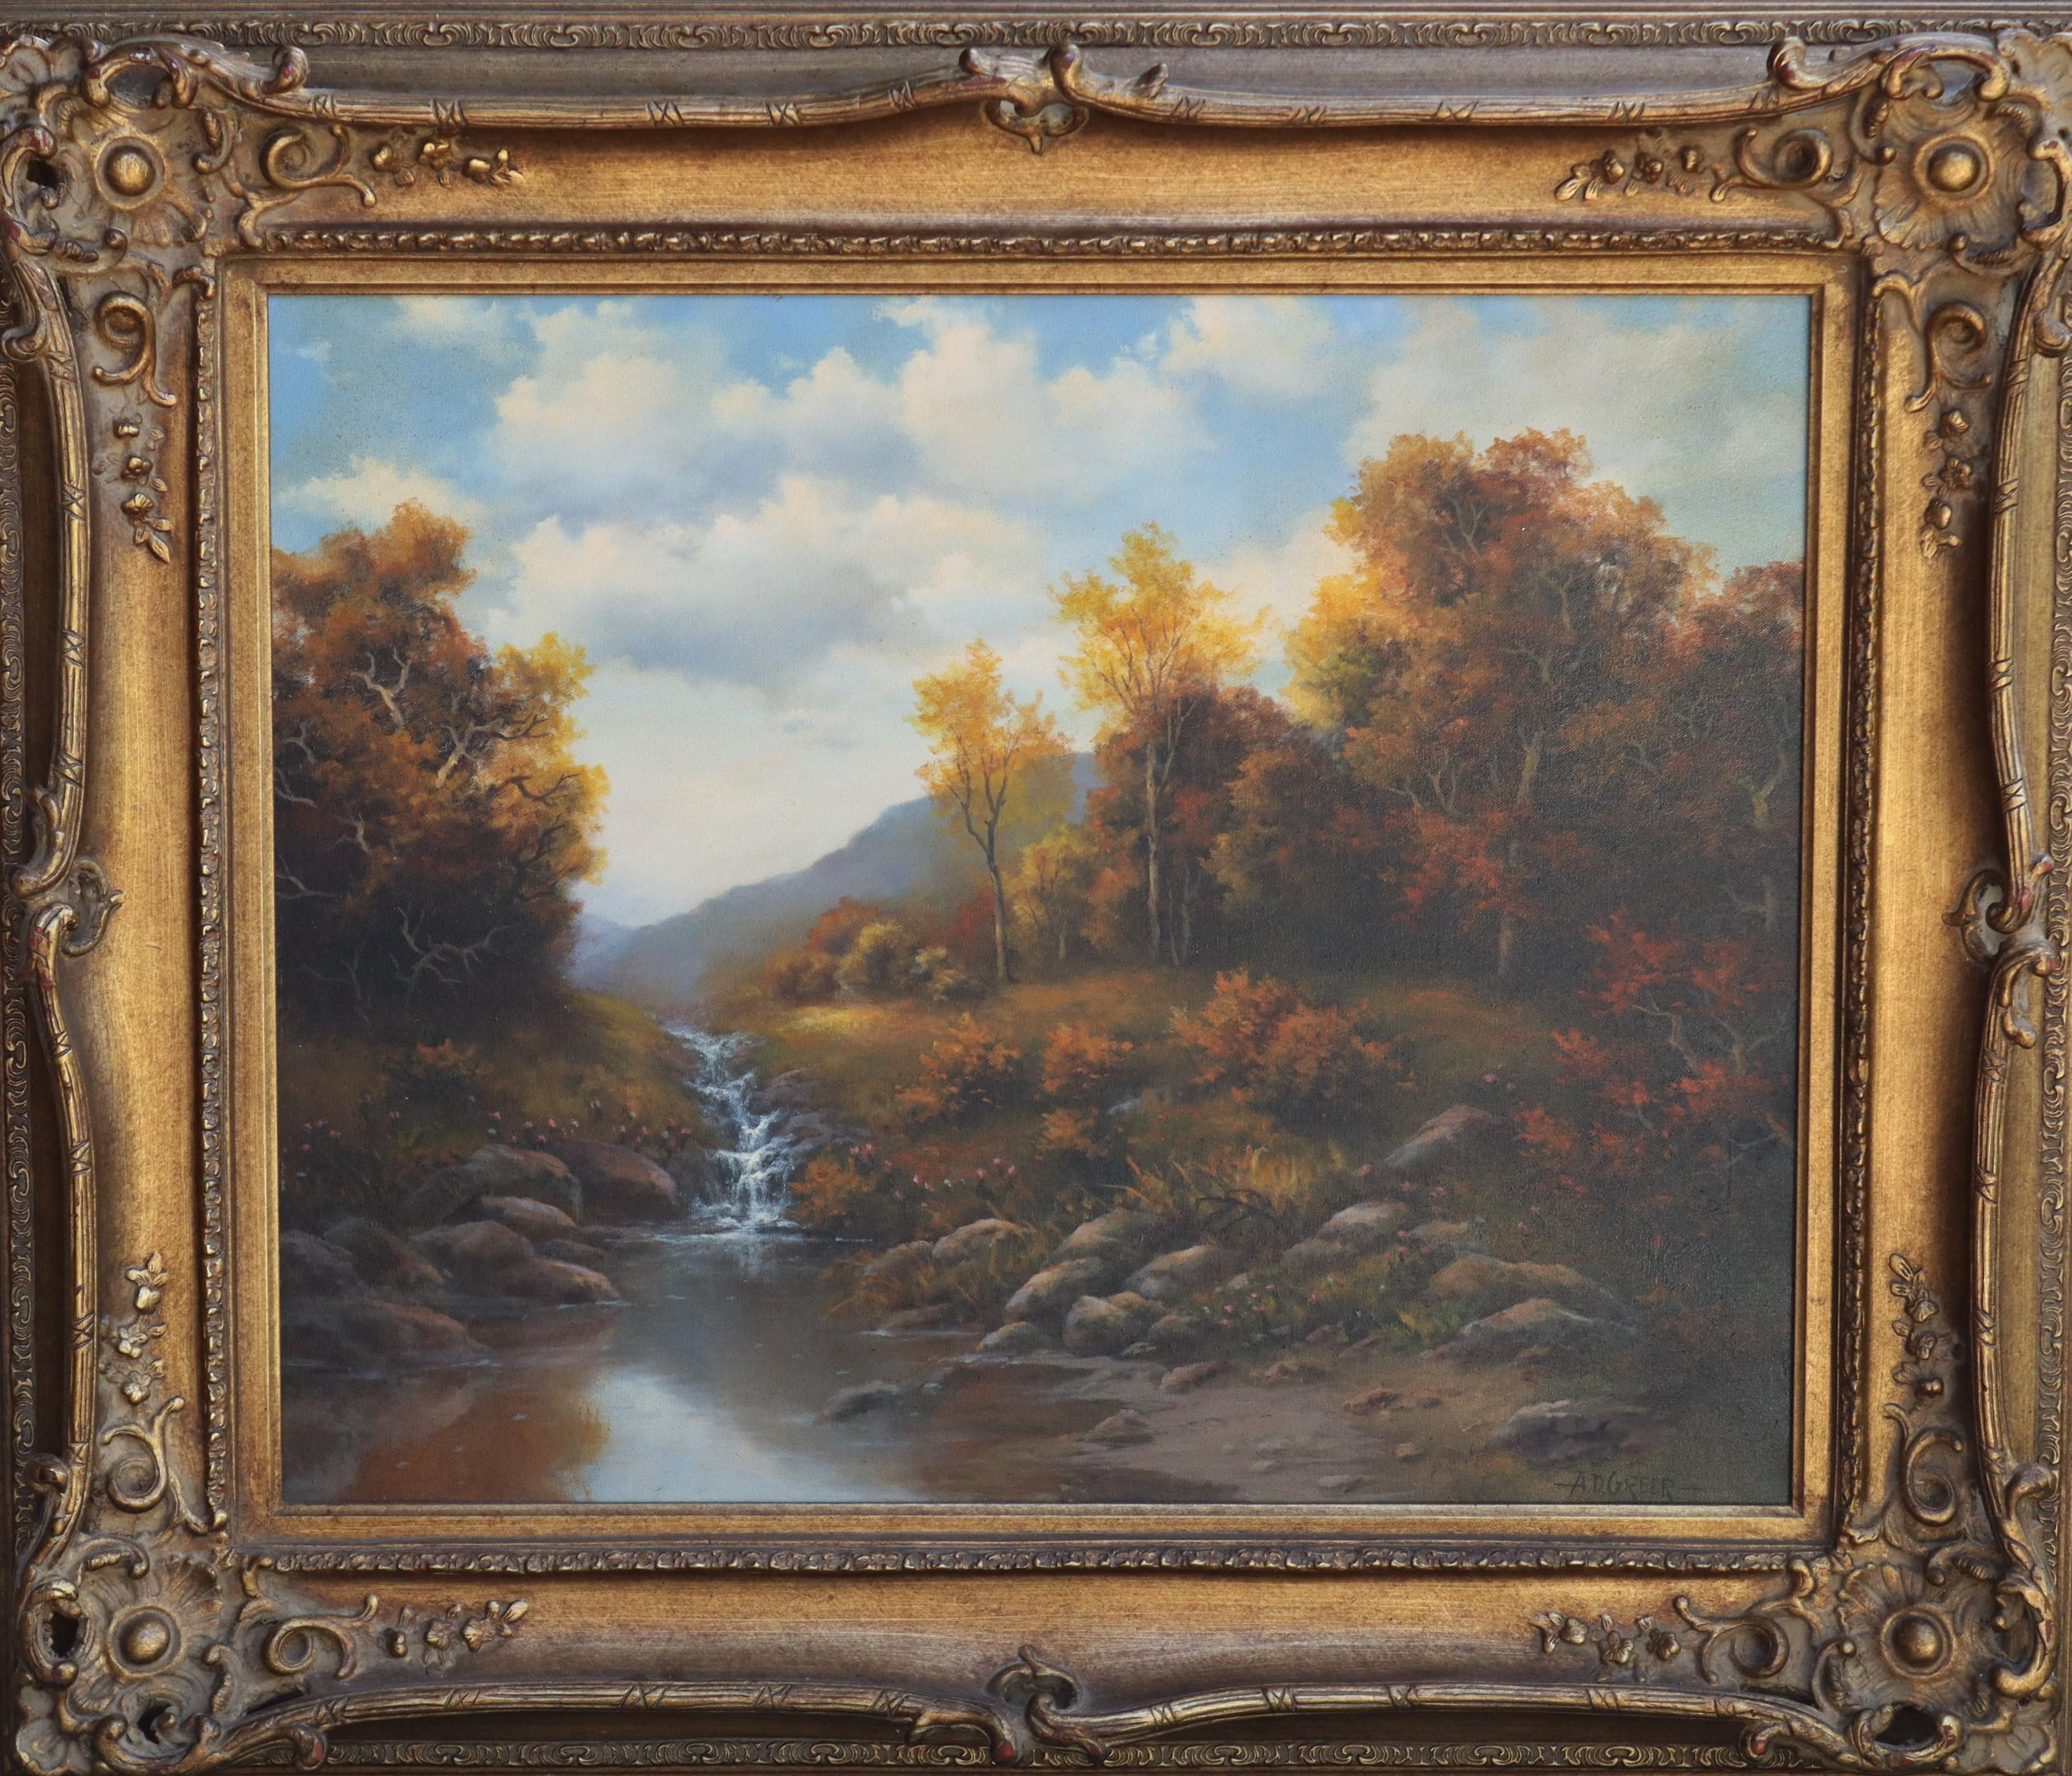 Autumnal Mountain Landscape with Creek - Painting by A.D. Greer